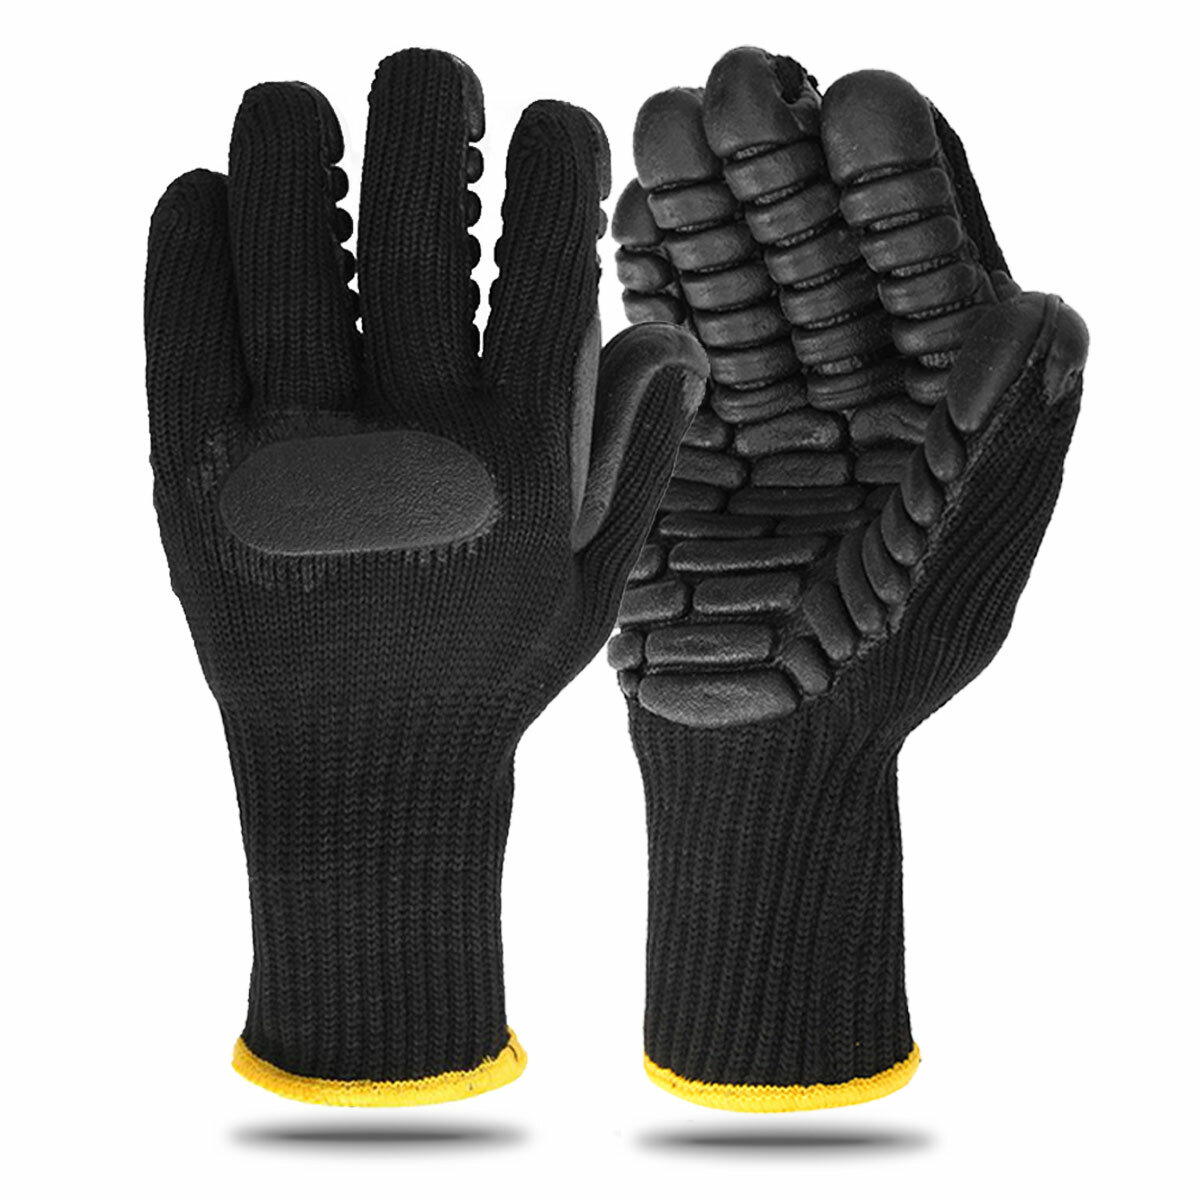 Rubber Touch Screen Gloves Anti-slip Shockproof Worker Safe Gloves Thickened Mining Drill Work Tactical Gloves for Women